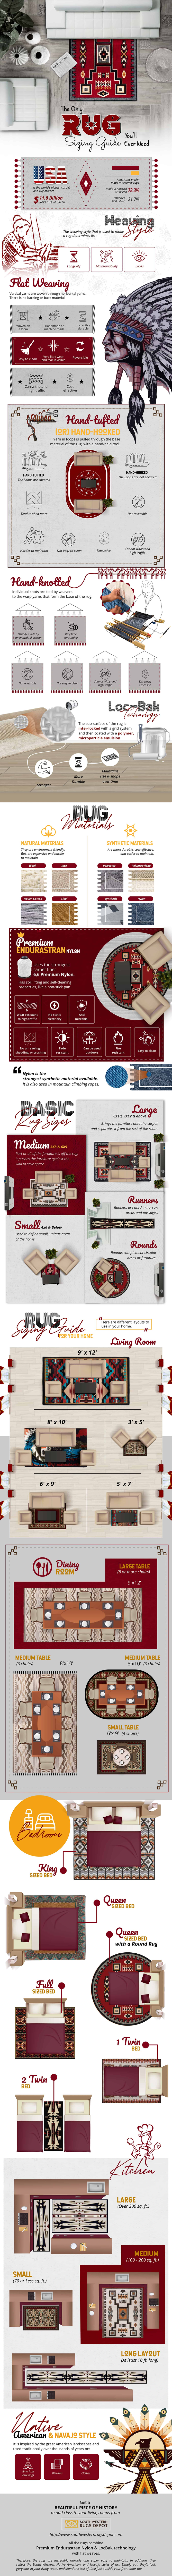 Rug sizing guide